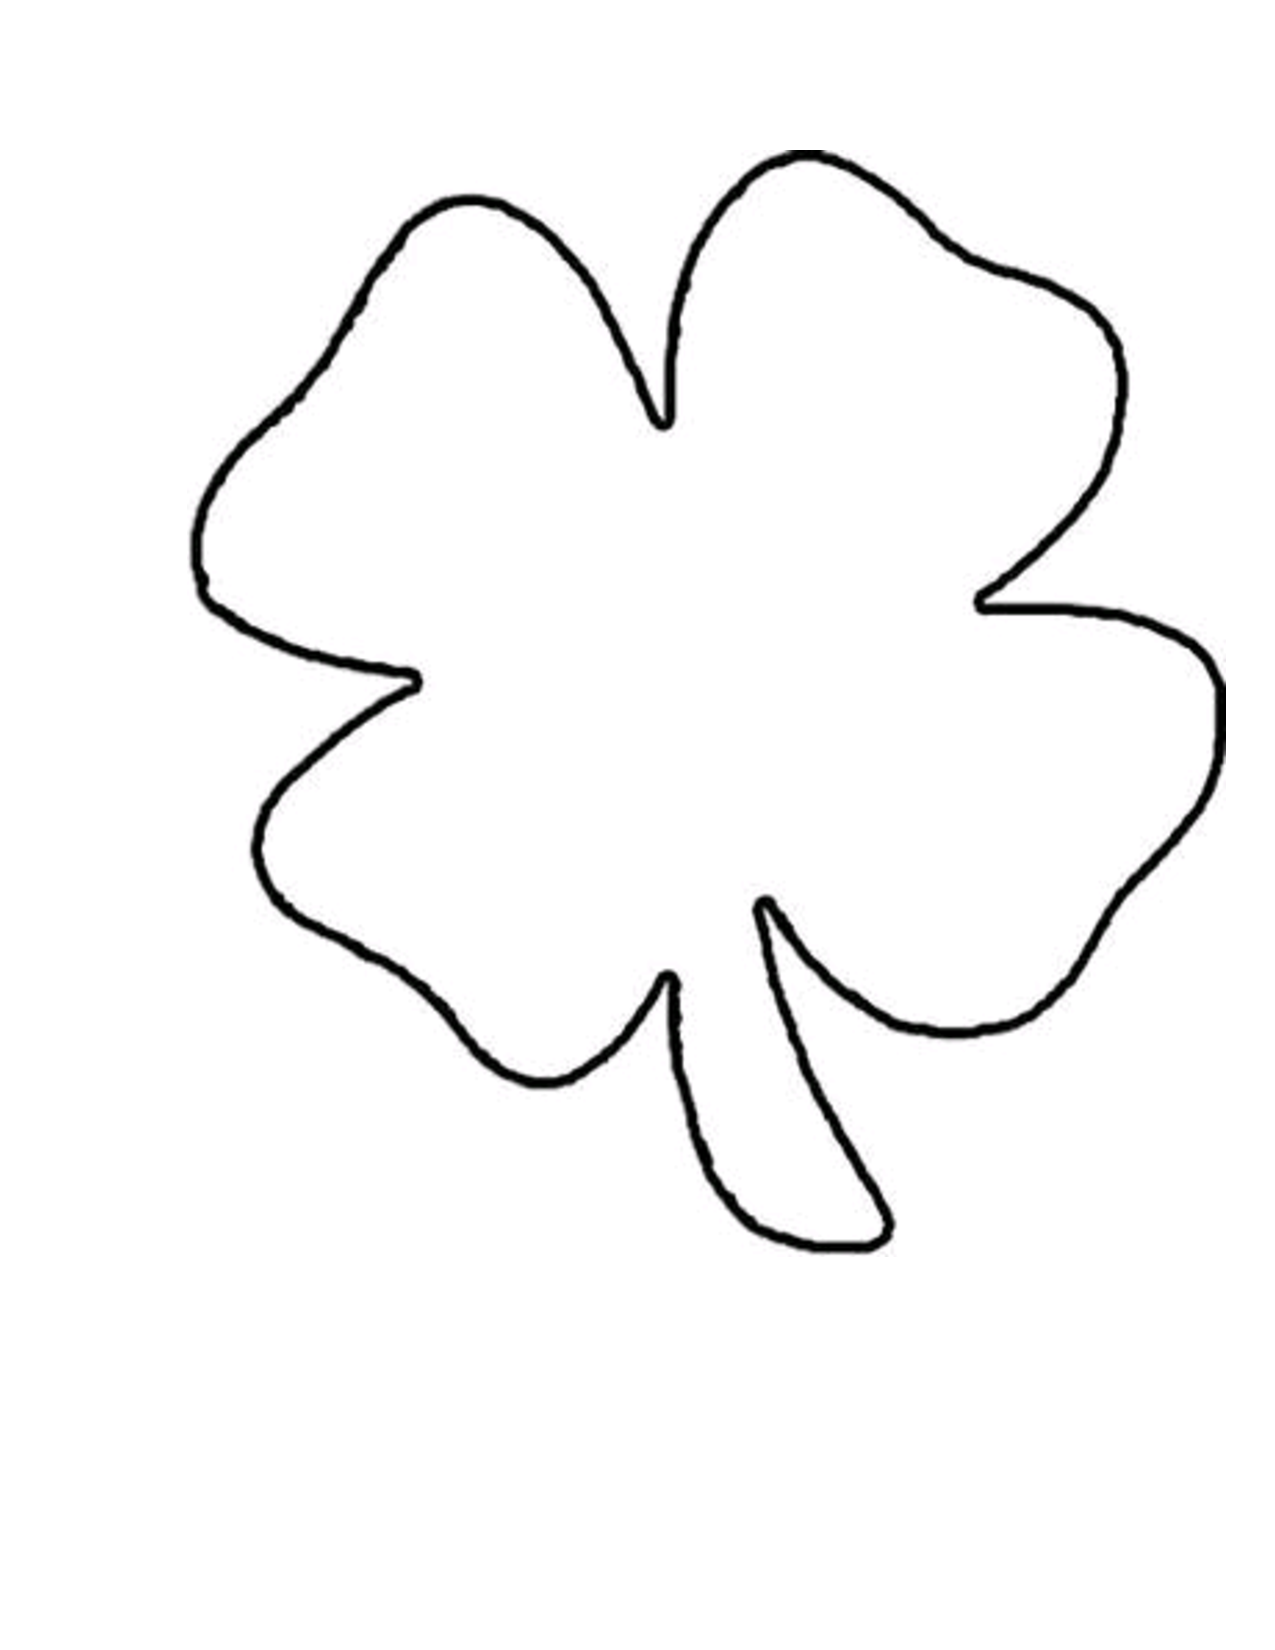 Clover Printable Template - Clipart library - Clipart library